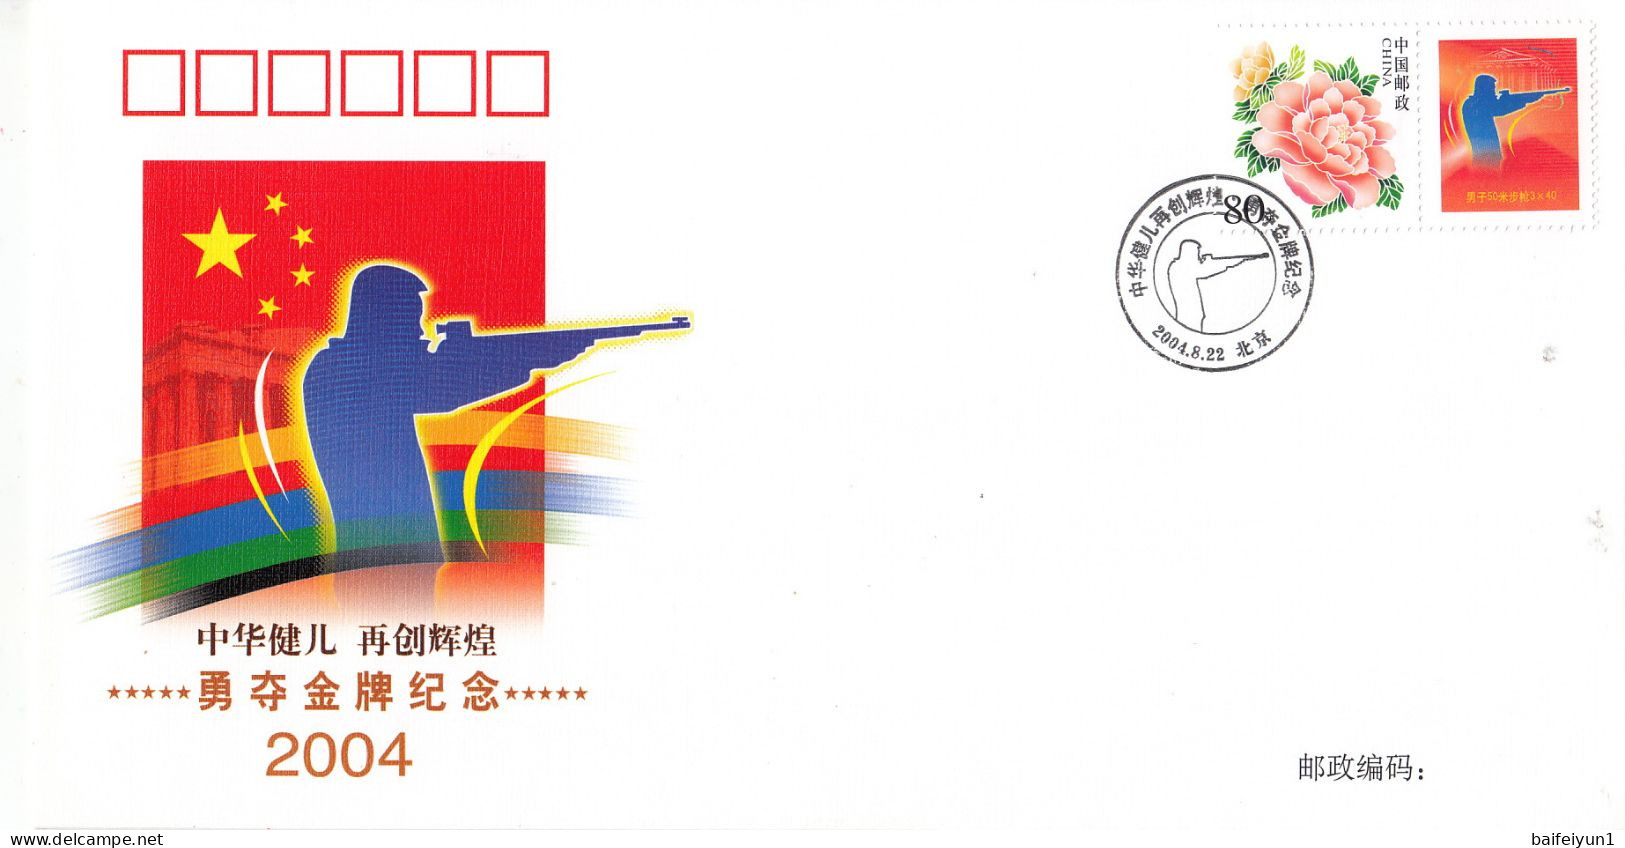 CHINA 2004 PFTN-39(19) Athens Olympic Games Gold Medal In The World Men's +50m Rifle 3 Positions Shooting  Event Cover - Weightlifting